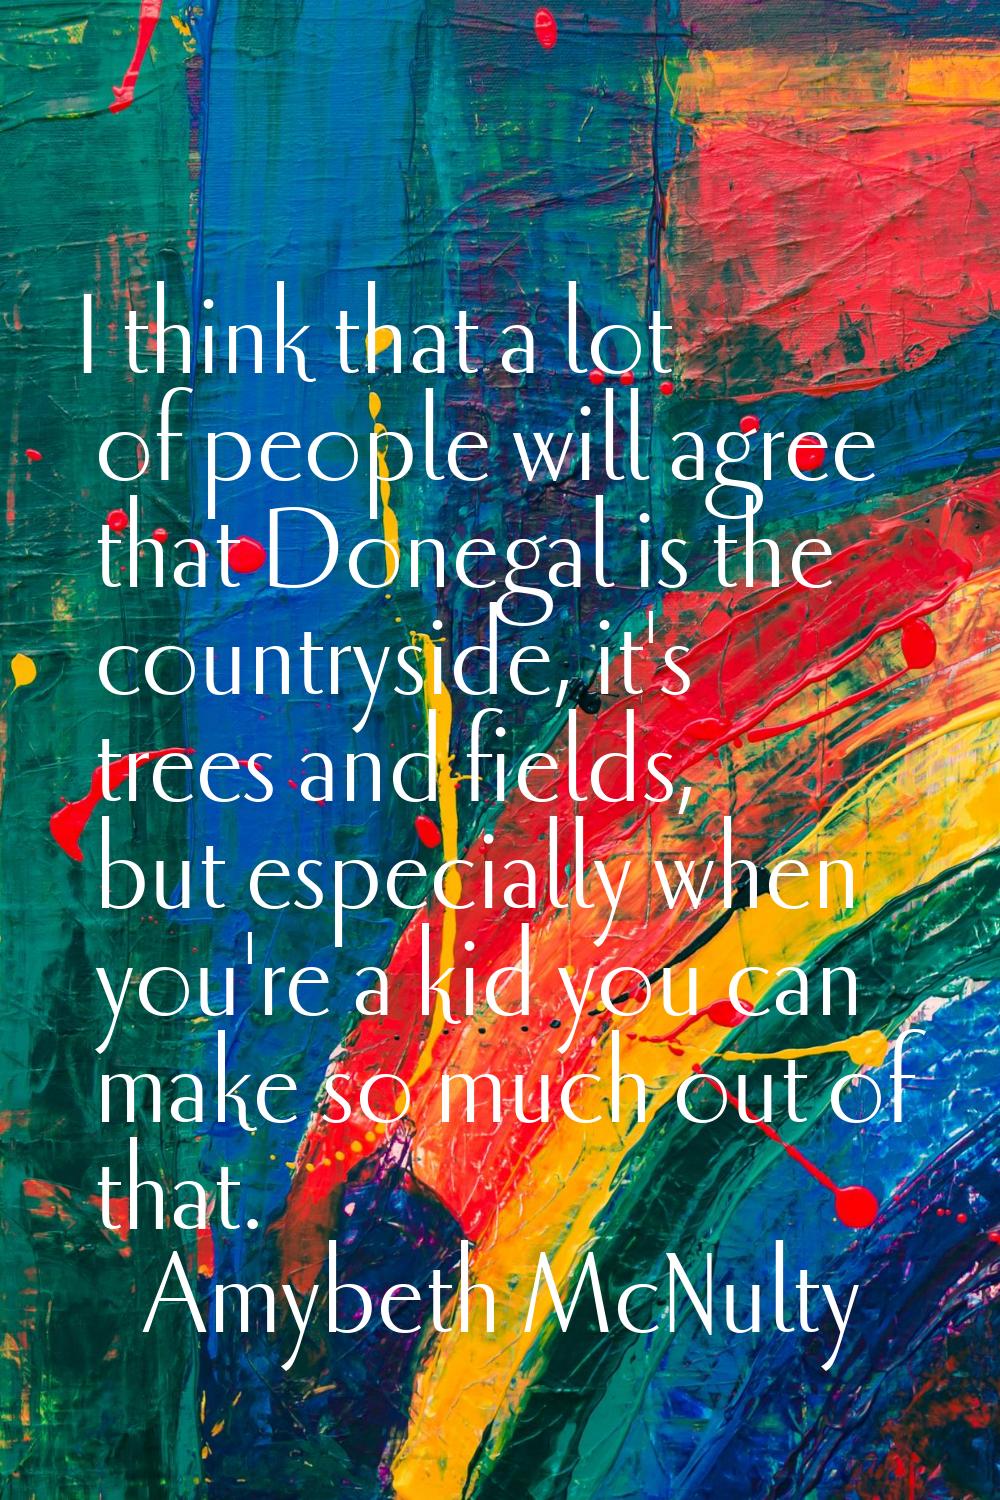 I think that a lot of people will agree that Donegal is the countryside, it's trees and fields, but